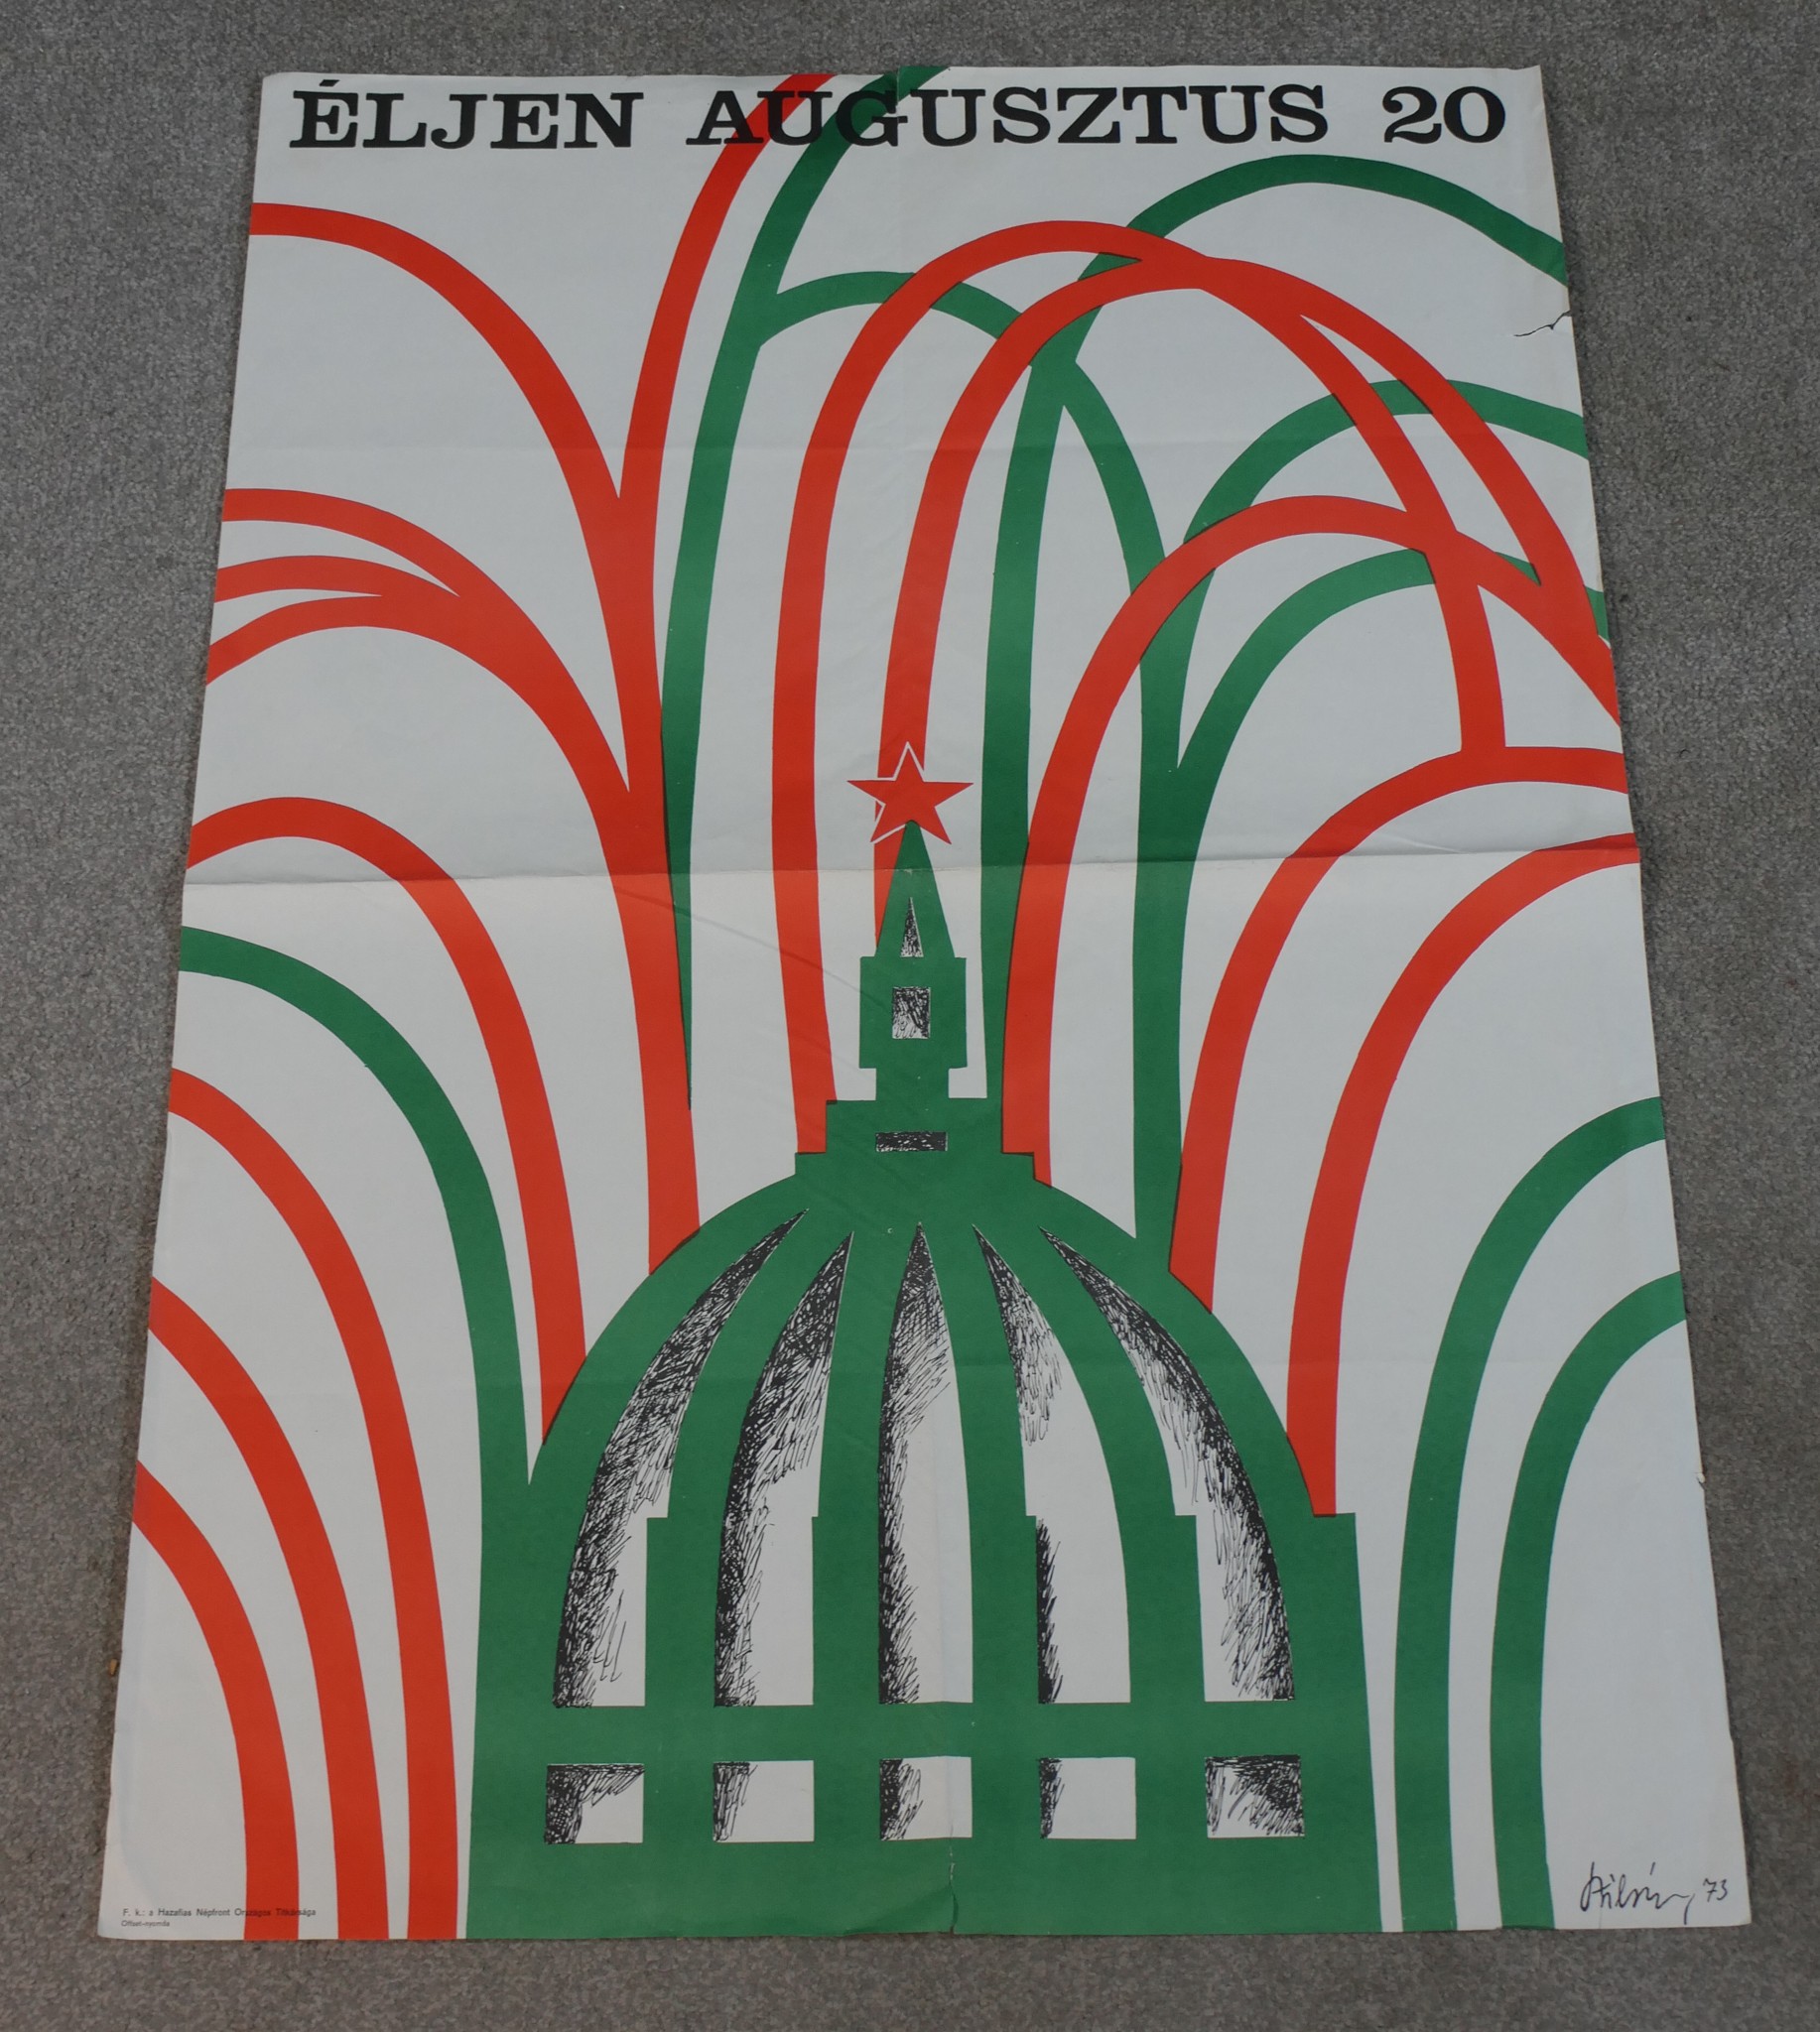 An unframed Eljen Augusztus 20 poster in association from the Patriotic Peoples Front in Hungary.